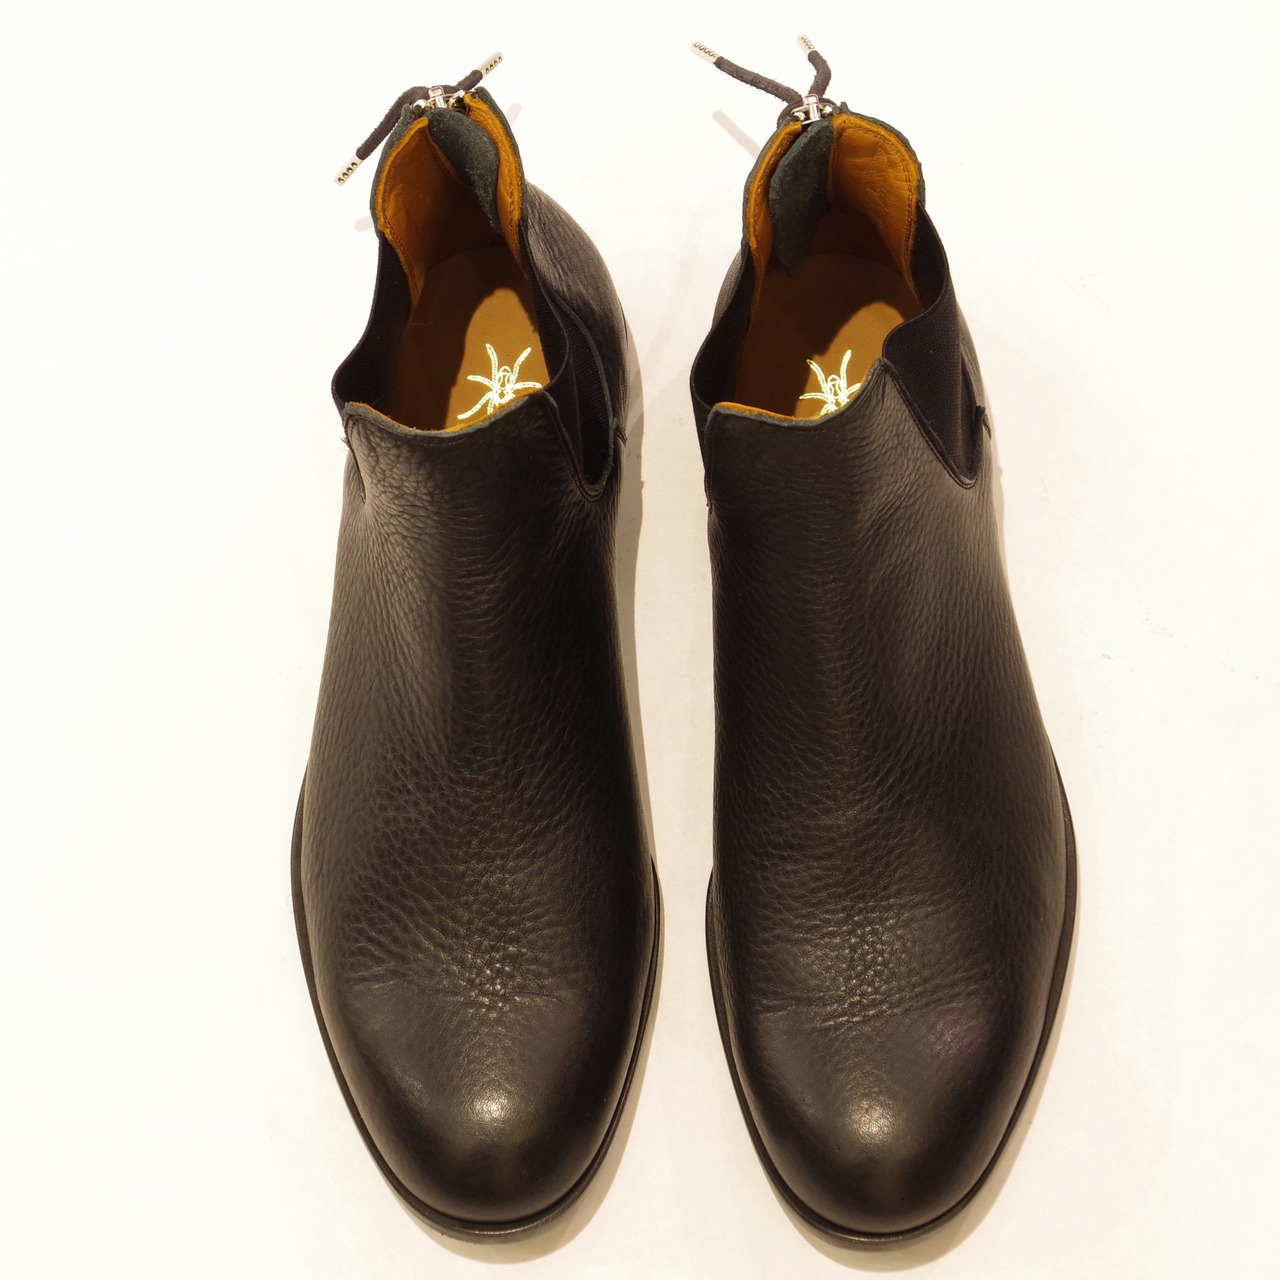 Tomo&Co  BACK ZIP SIDE GORE BOOTS